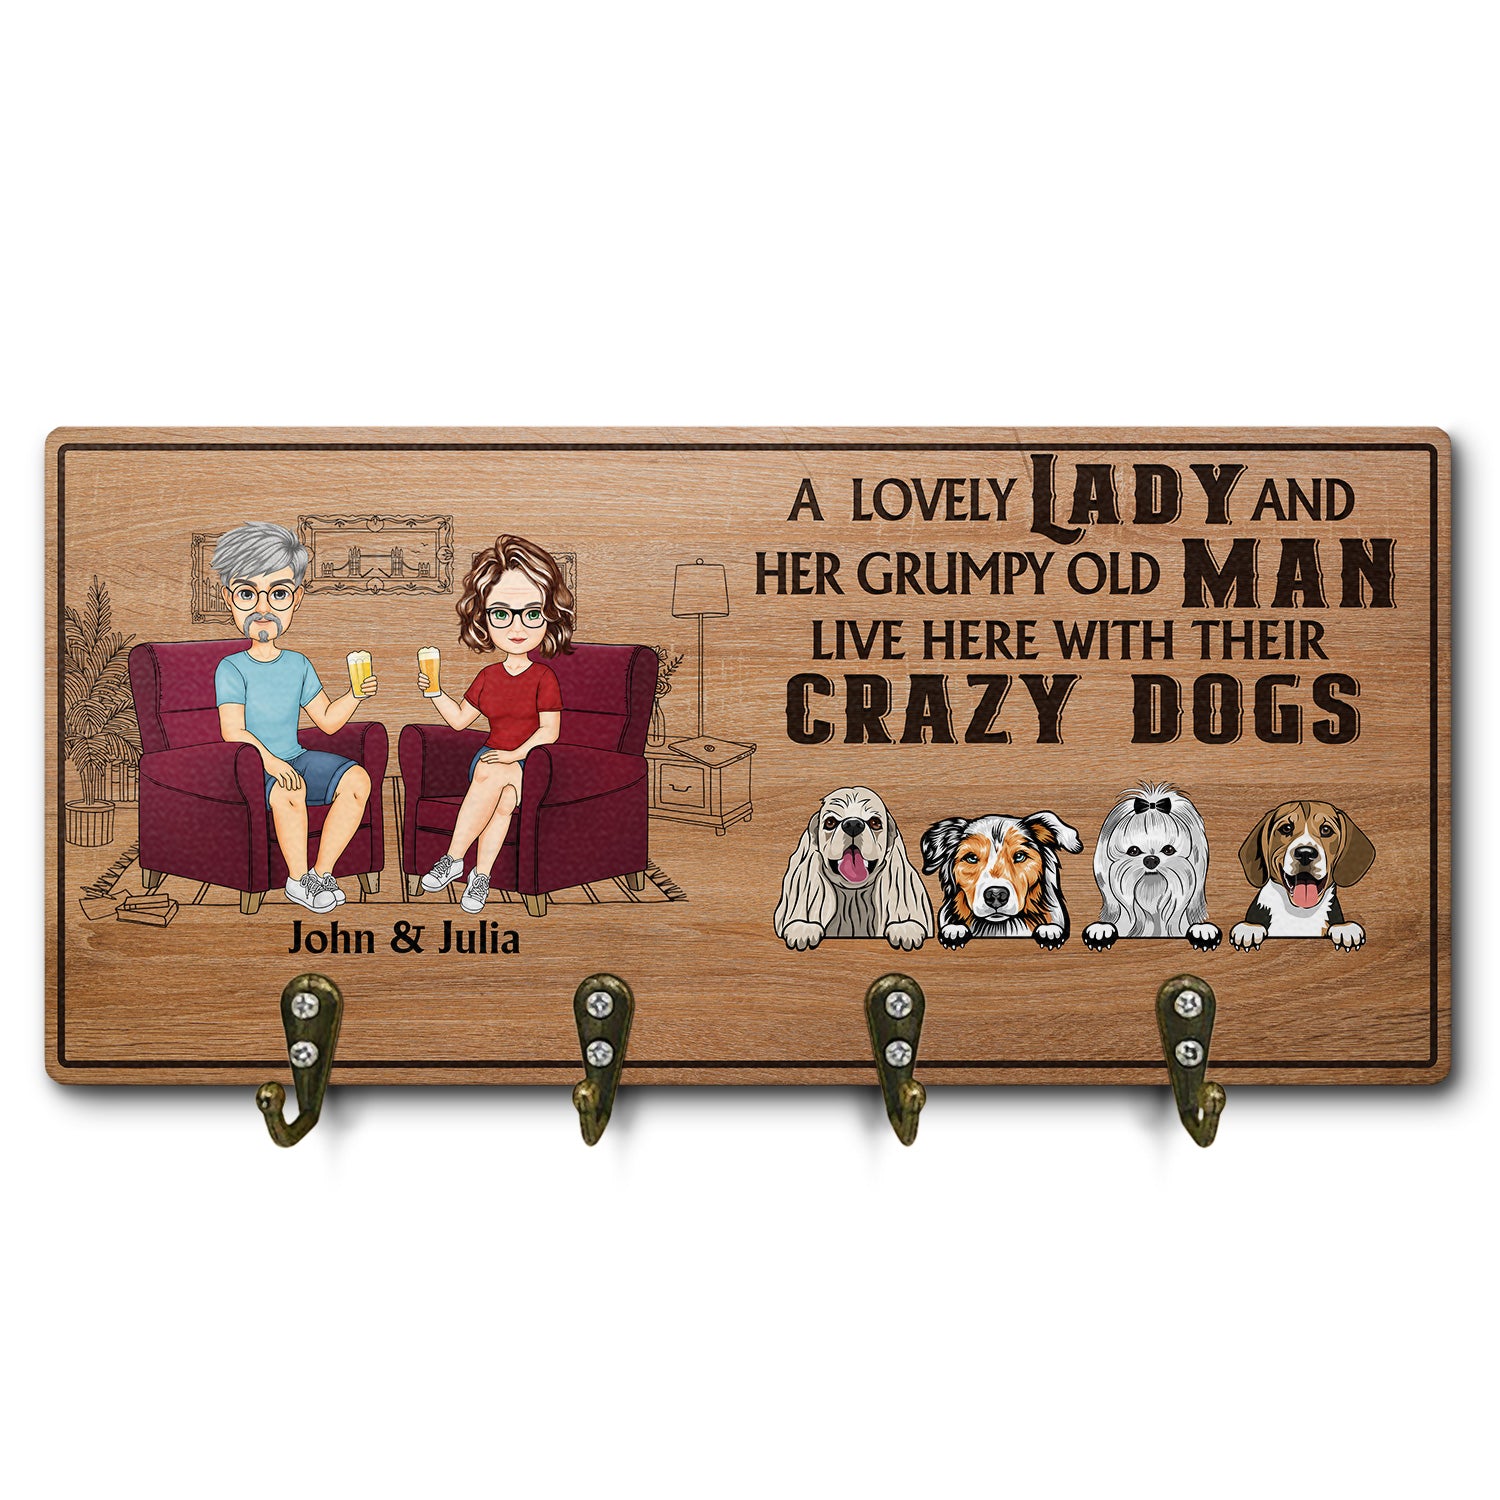 Lovely Lady Grumpy Old Man With Crazy Dogs - Gift For Dog Owners, Couples - Personalized Wood Key Holder